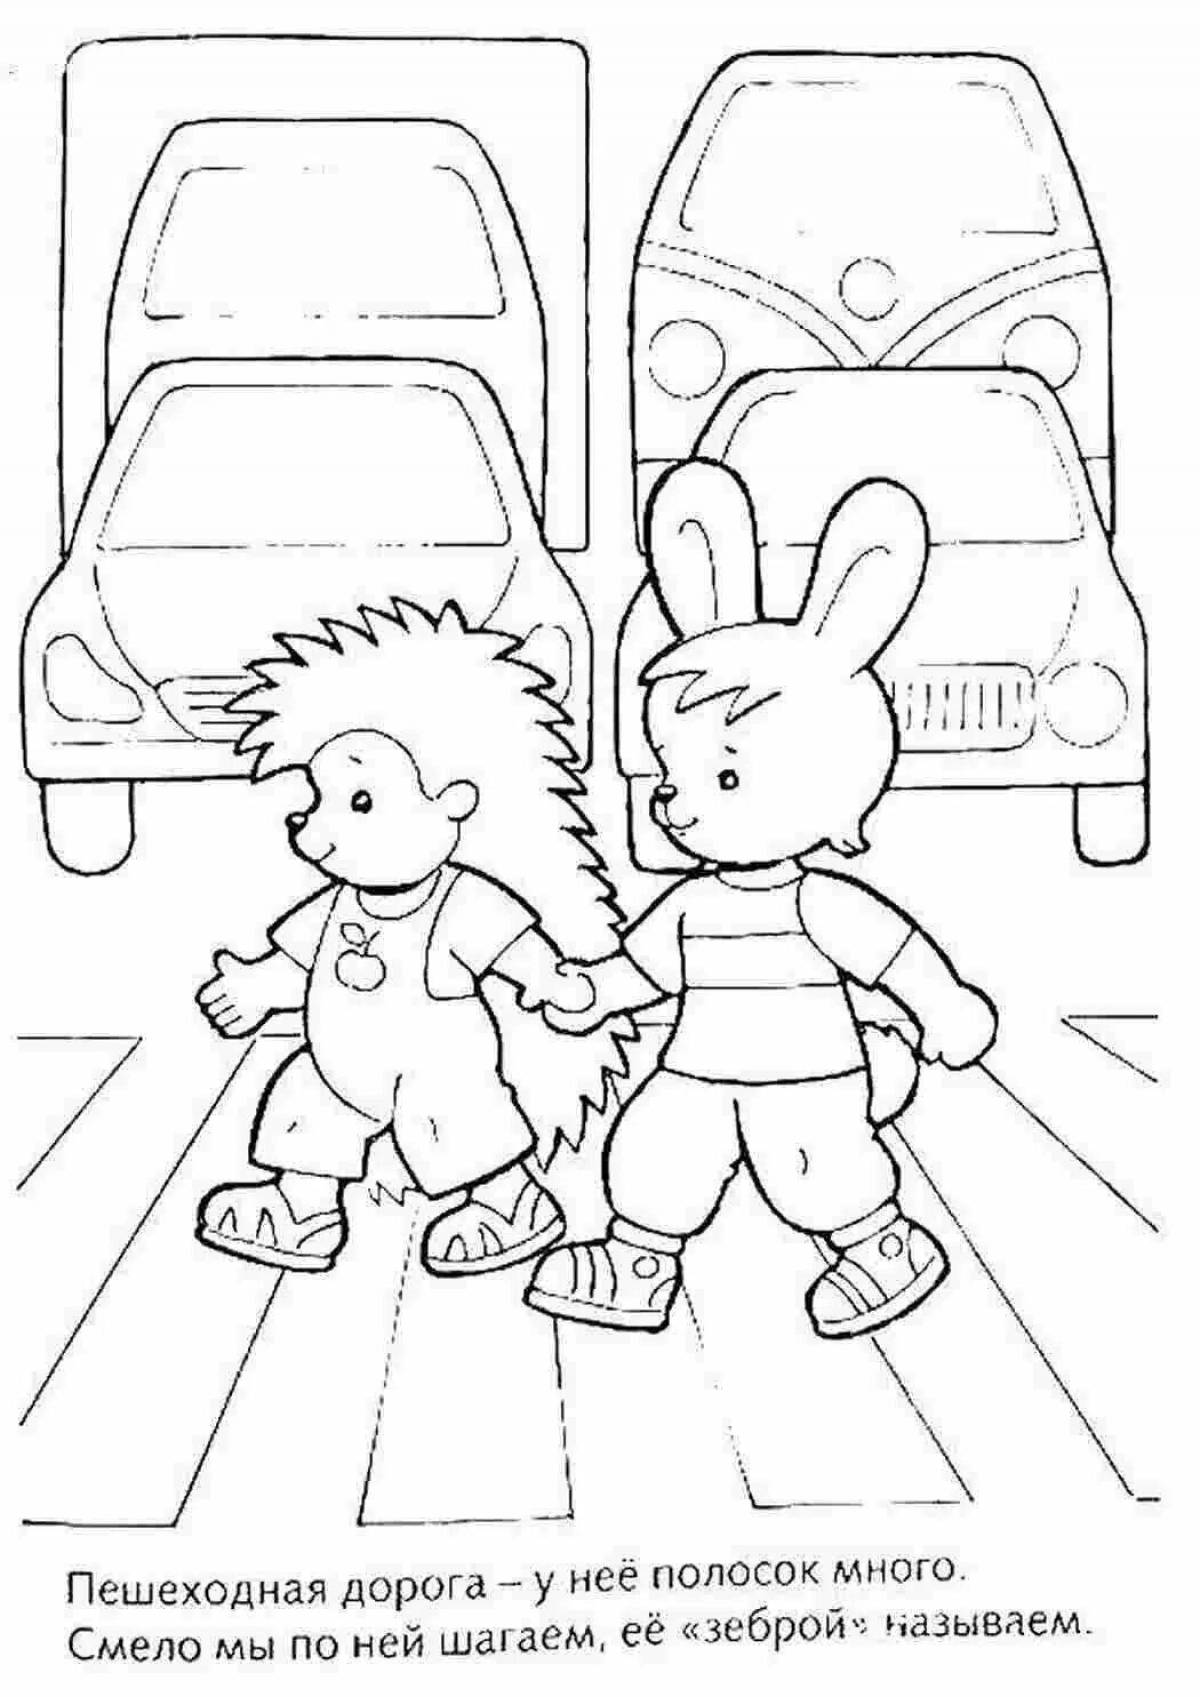 Amazing road coloring book for kids